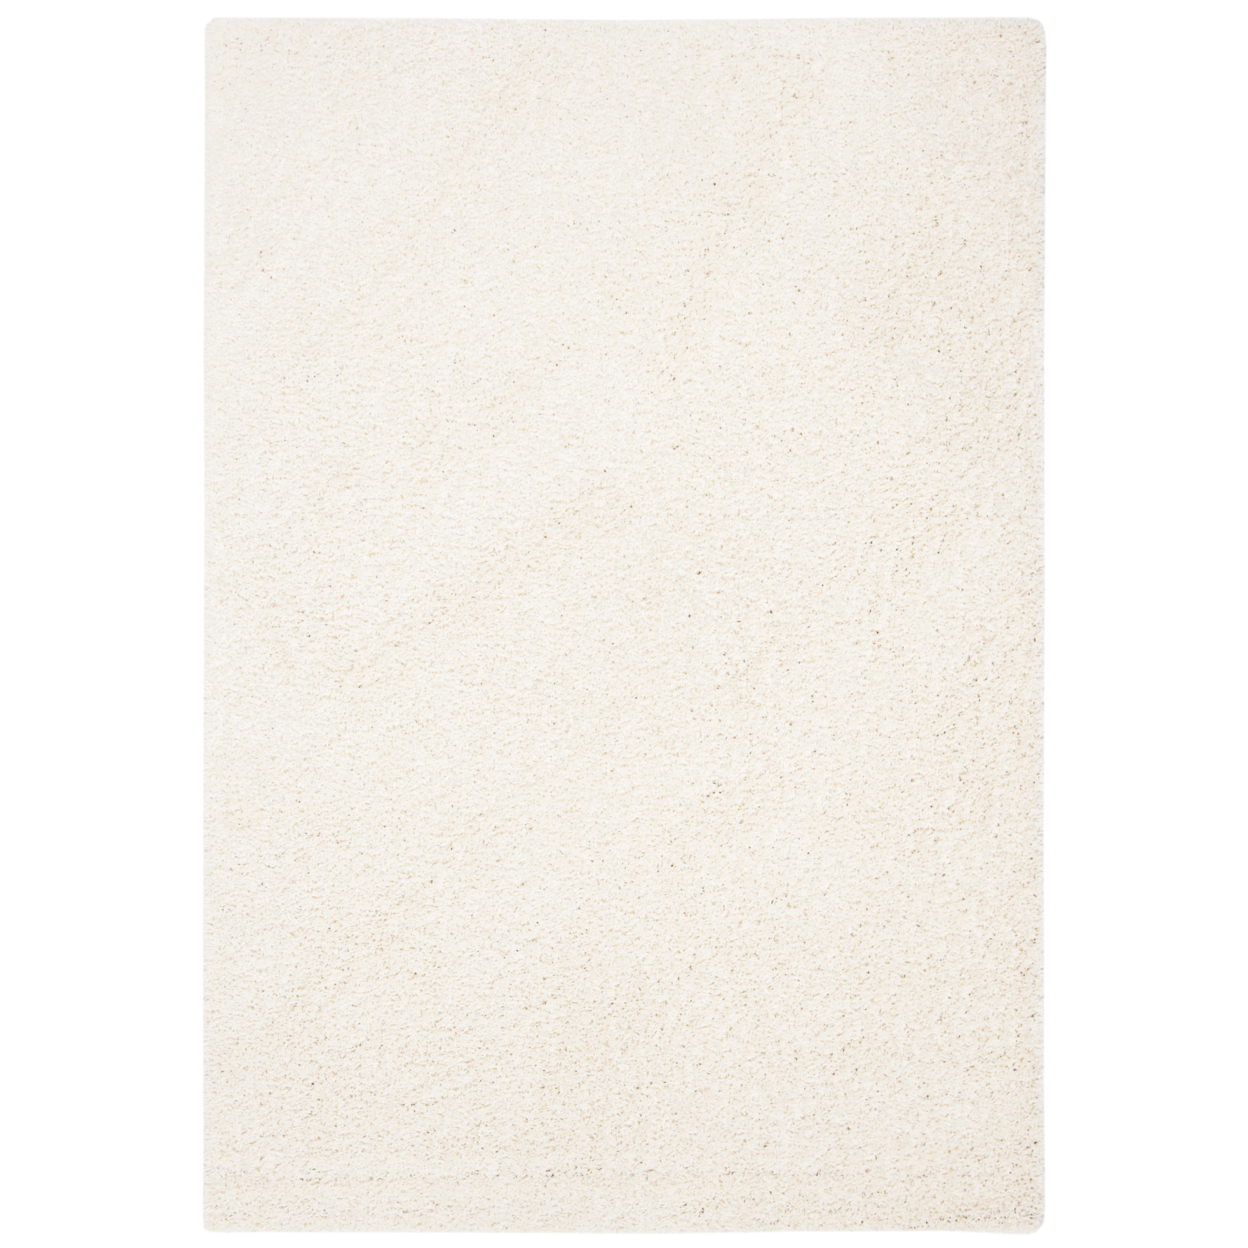 SAFAVIEH Primo Shag Collection PRM300A Ivory Rug - 5' 3 X 7' 6